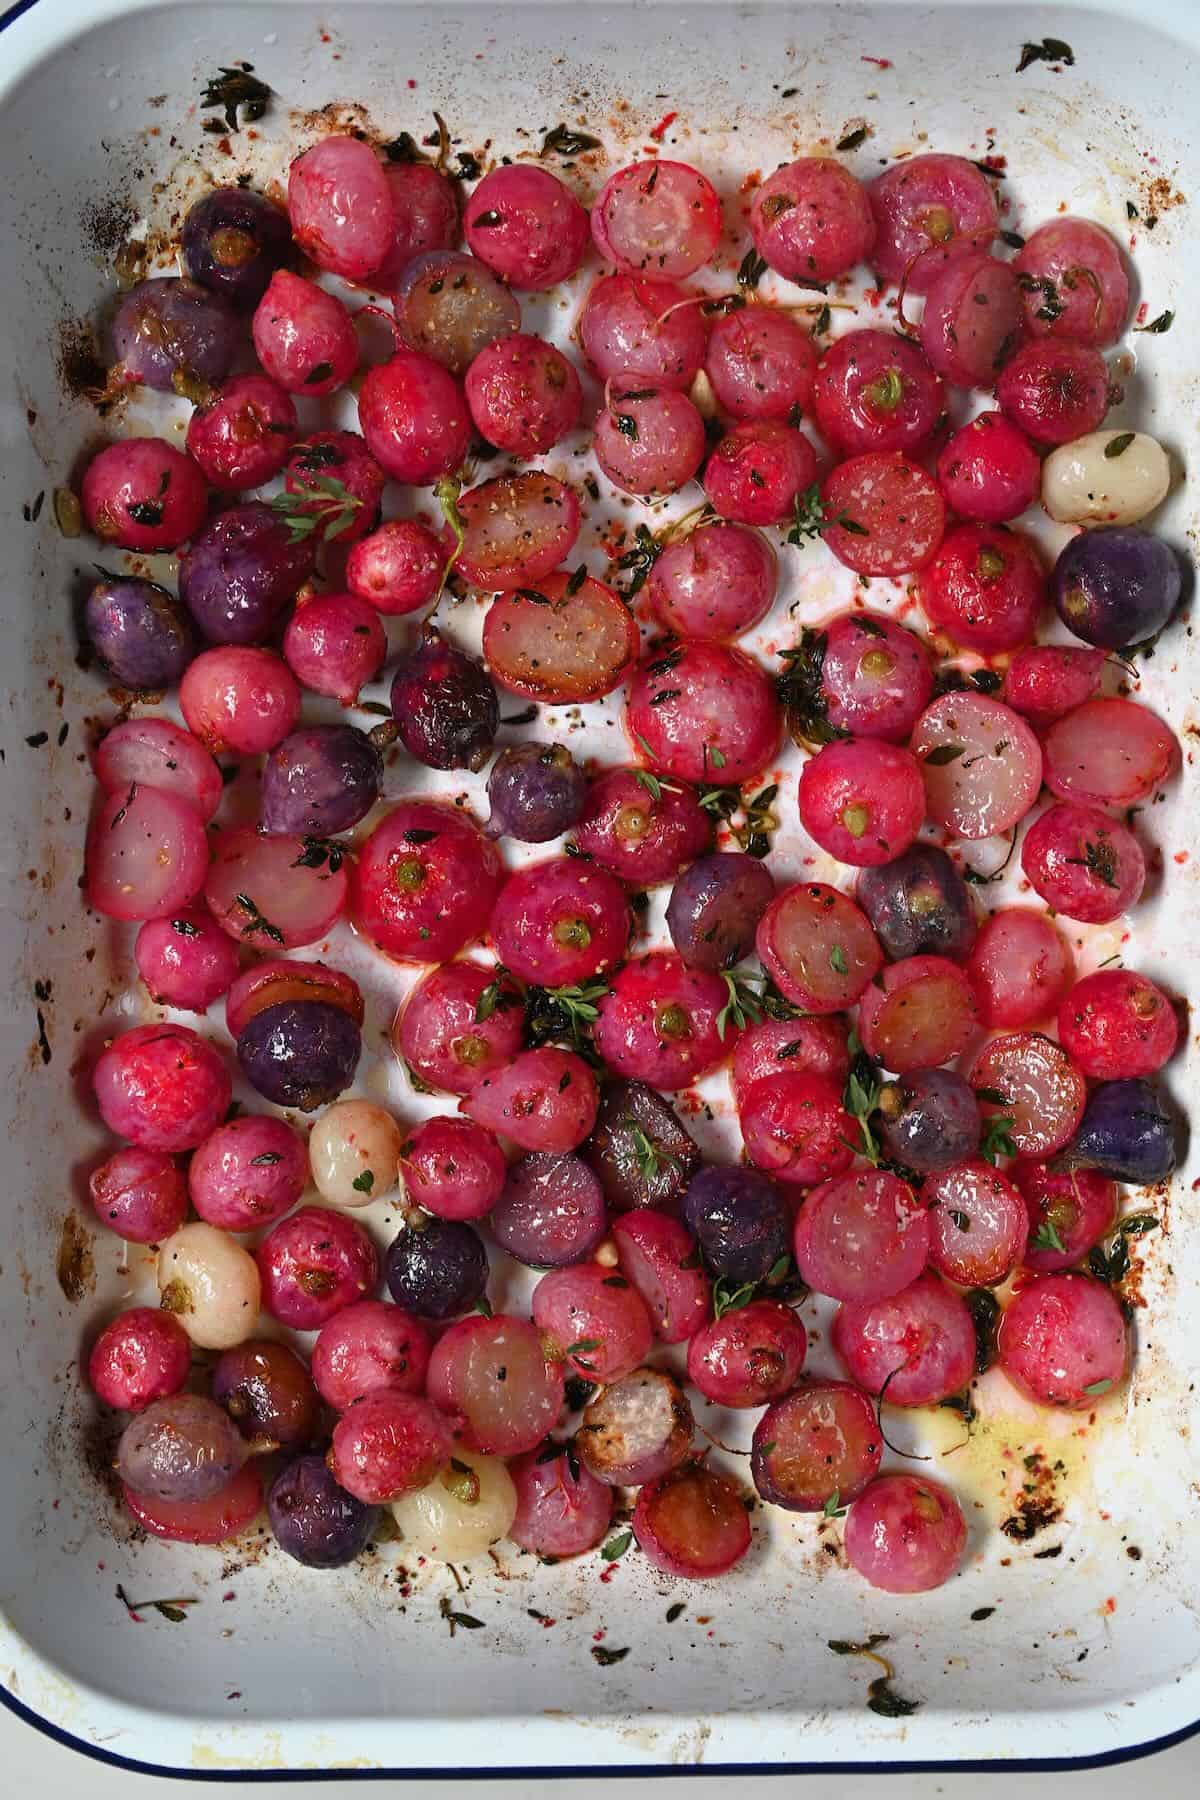 Roasted radishes in a tray